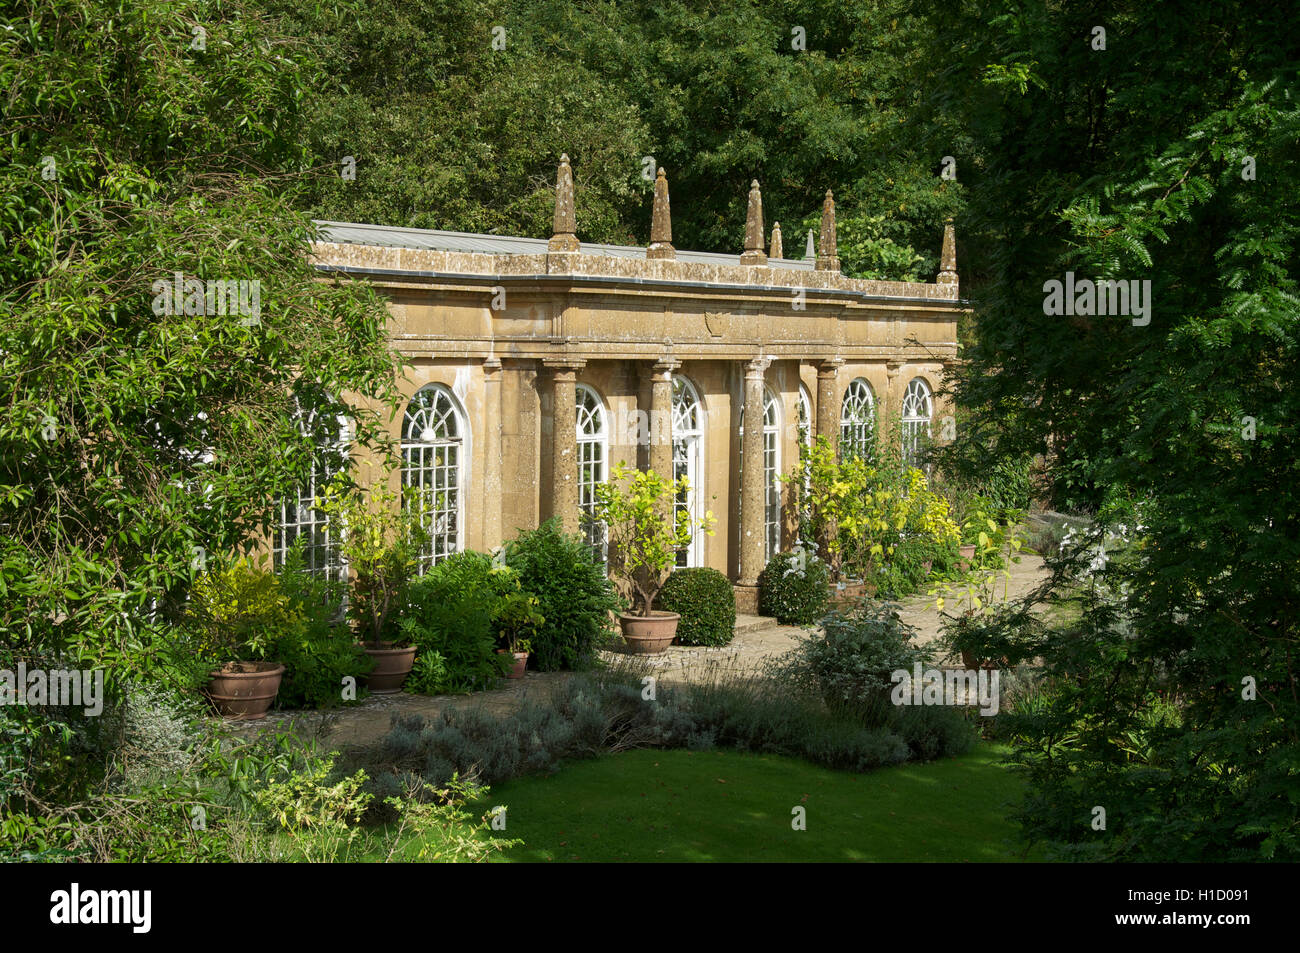 Architecture. An orangery in the Italianate gardens of Mapperton. A picturesque historic Manor house near Beaminster in rural West Dorset, England. Stock Photo